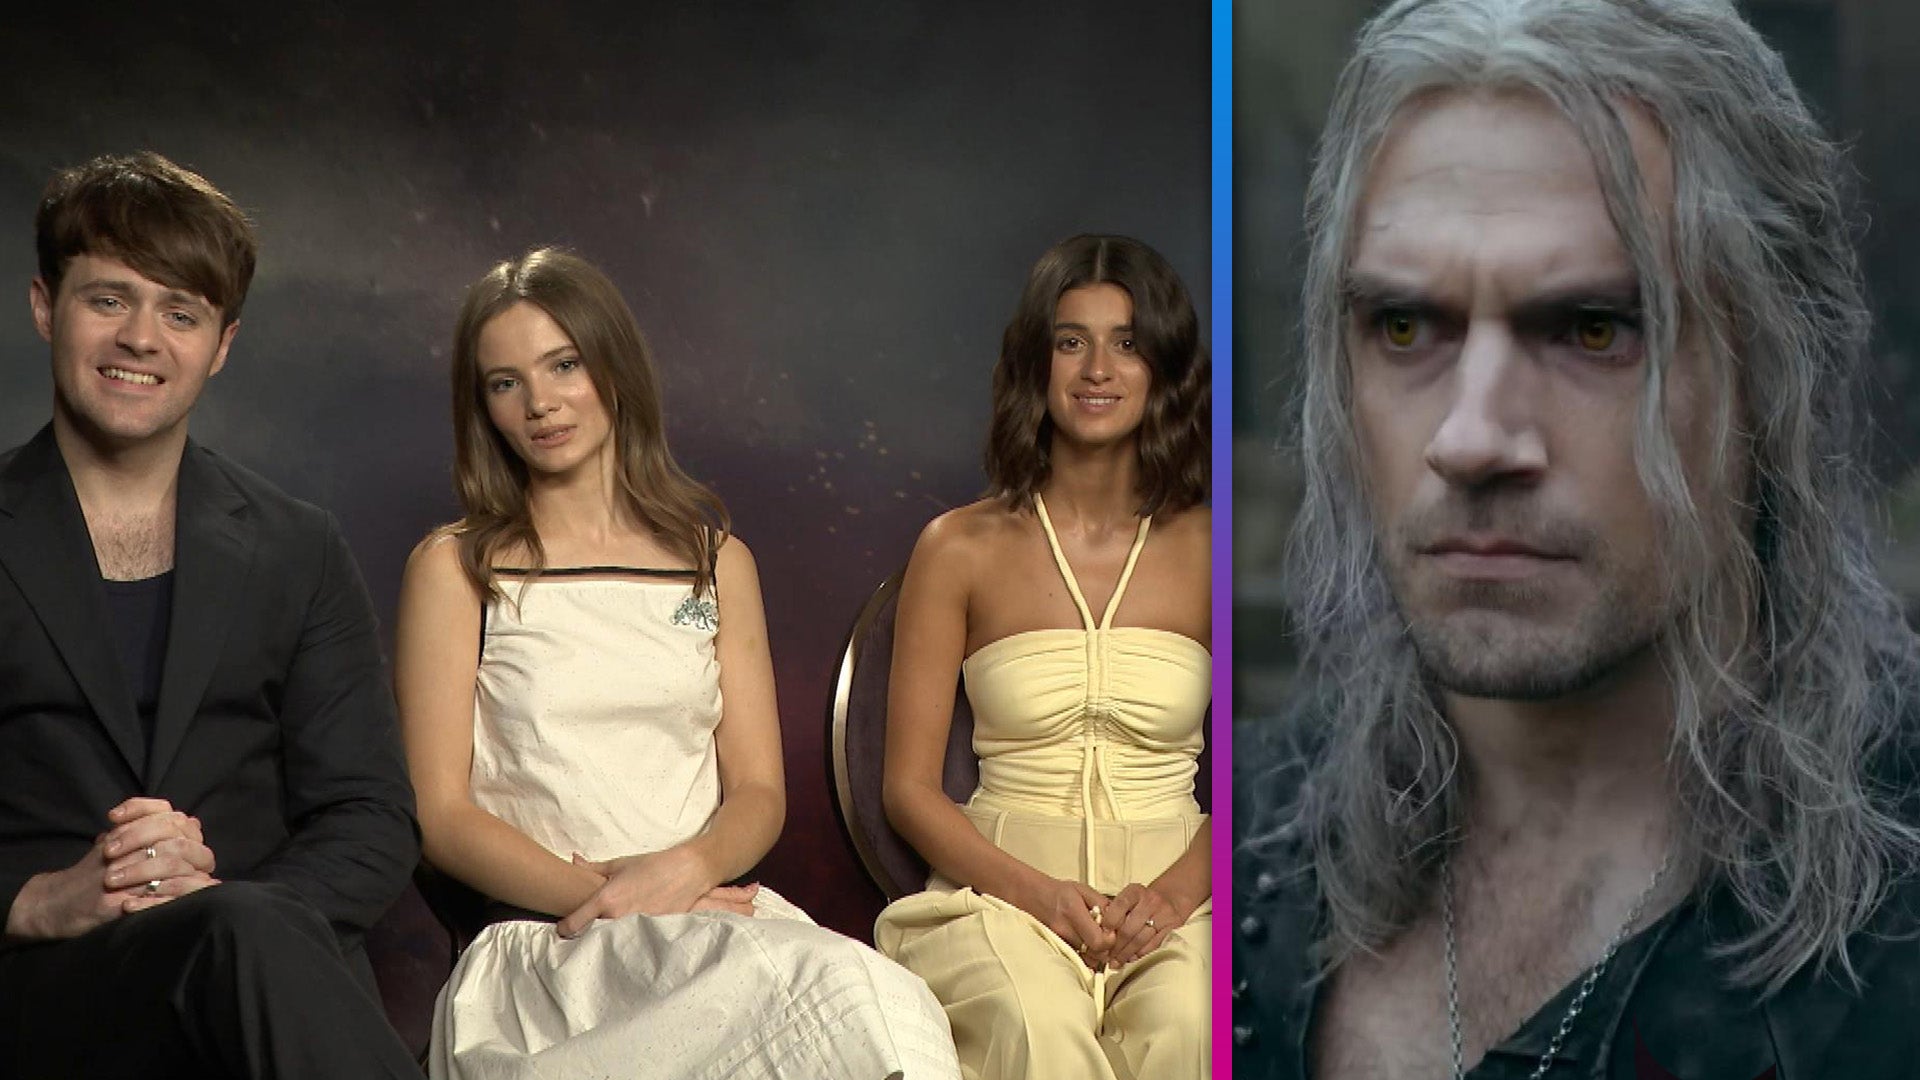 The Witcher Season 3: Premiere Date, Cast And Other Things We Know